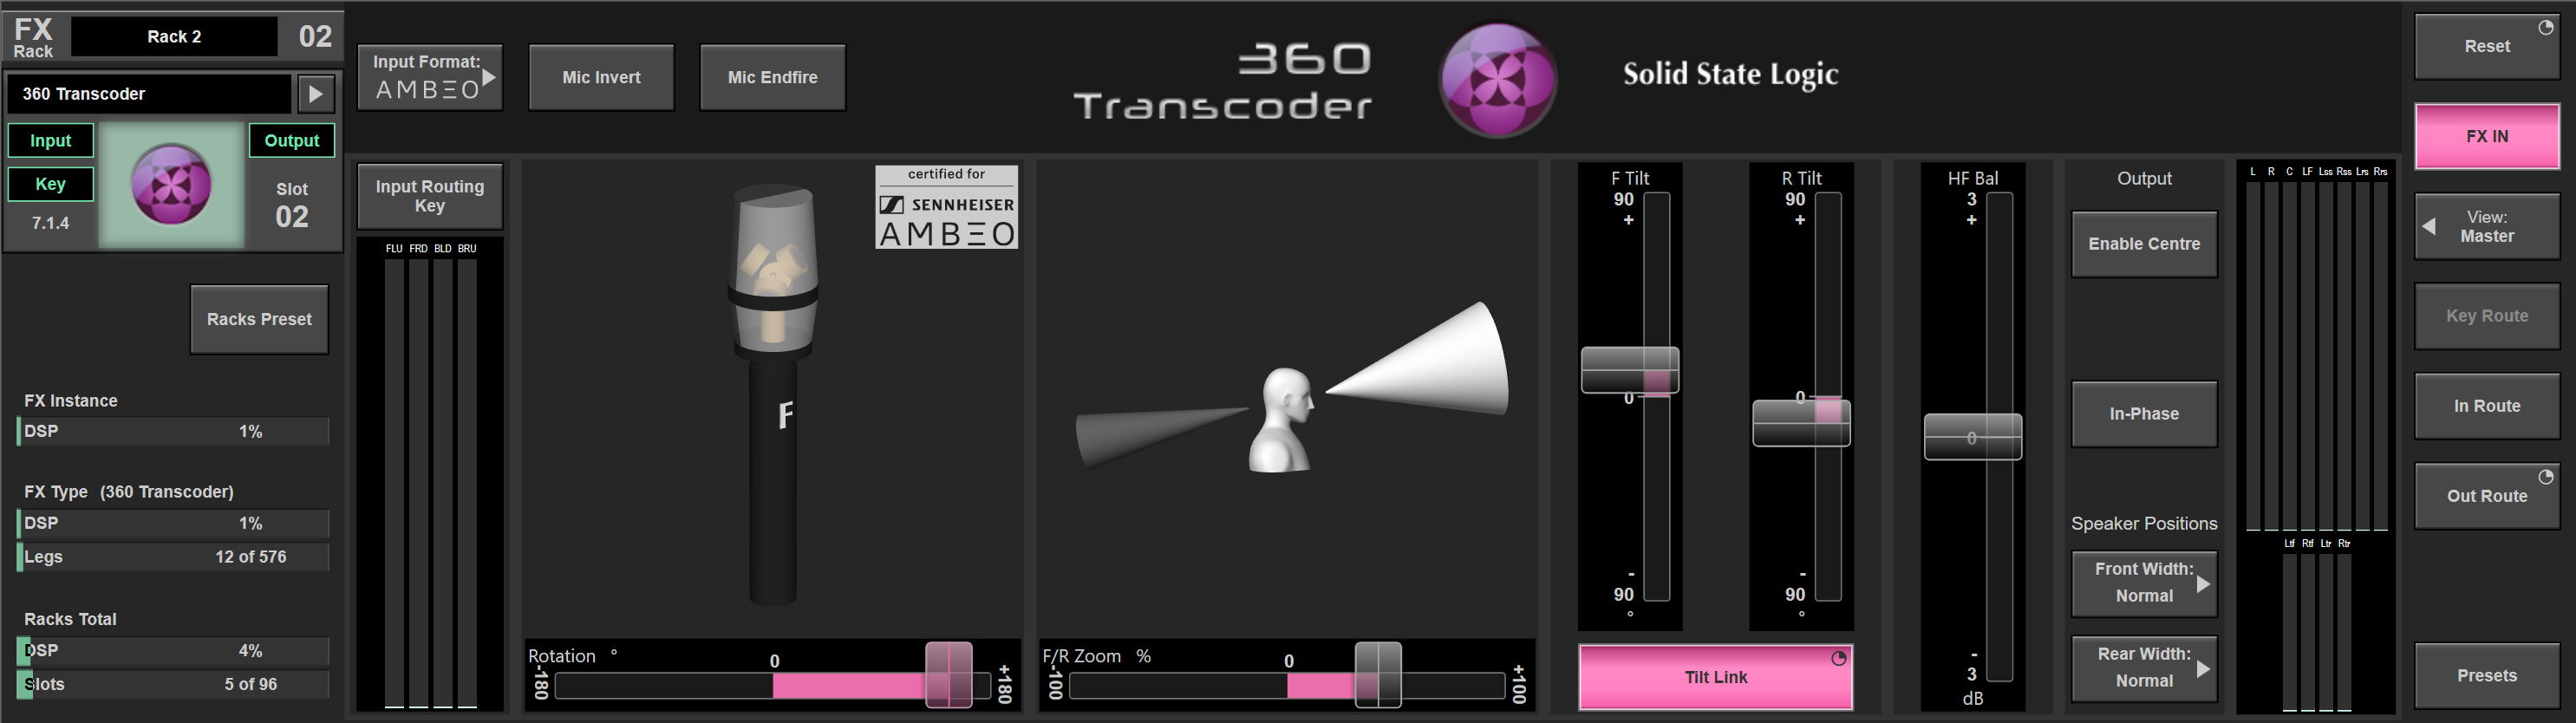 Graphical user interface of SSL’s 360 transcoder with AMBEO A-B converter